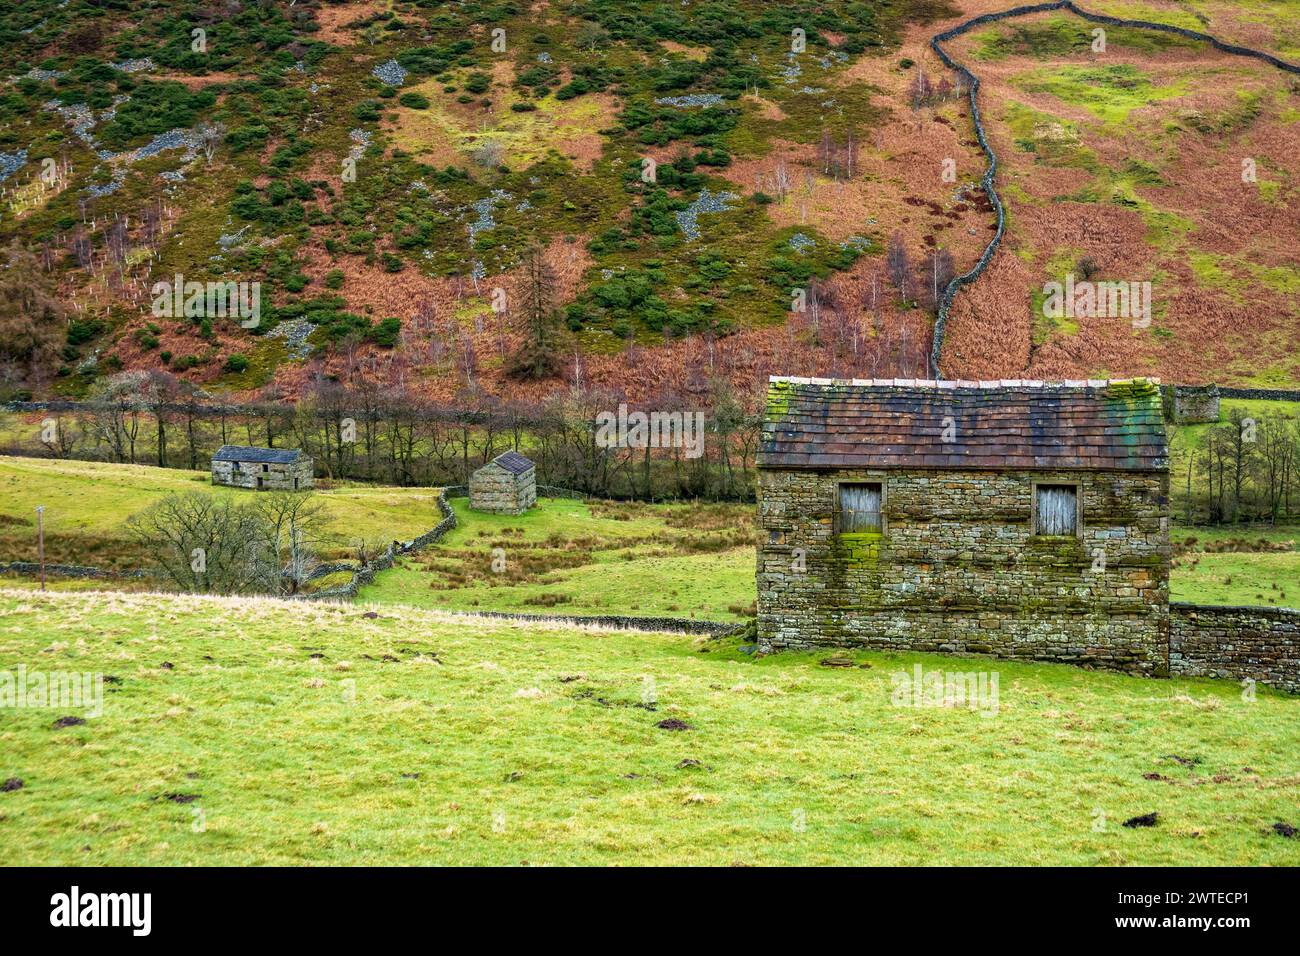 Stone barns and dry stone walls in Swaledale, Yorkshire Dales National Park.  The Coast to Coast long distance footpath passes through Swaledale. Stock Photo